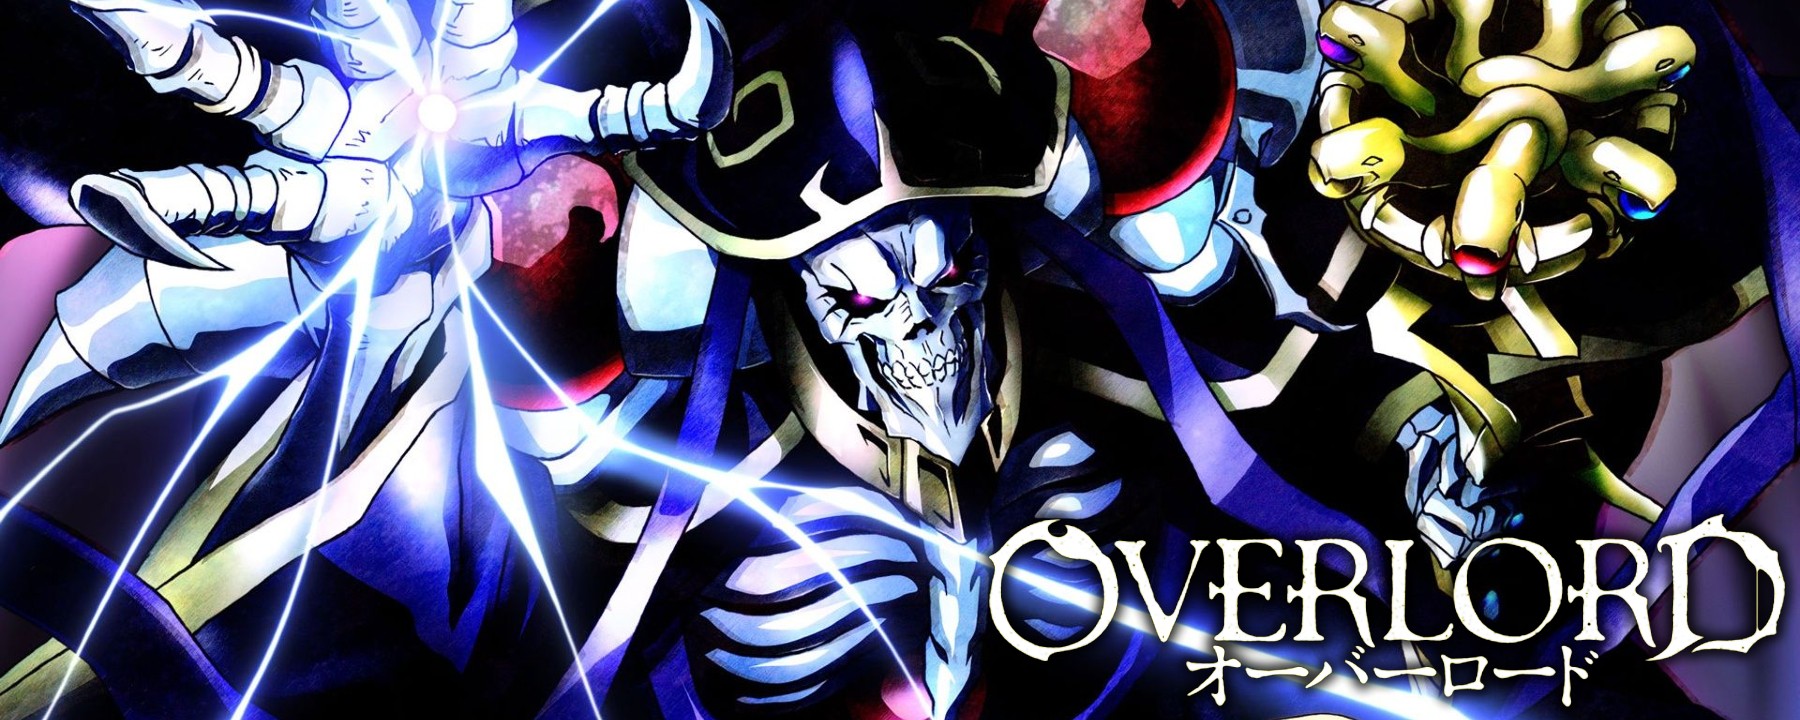 Discover more than 83 overlord anime review latest - awesomeenglish.edu.vn